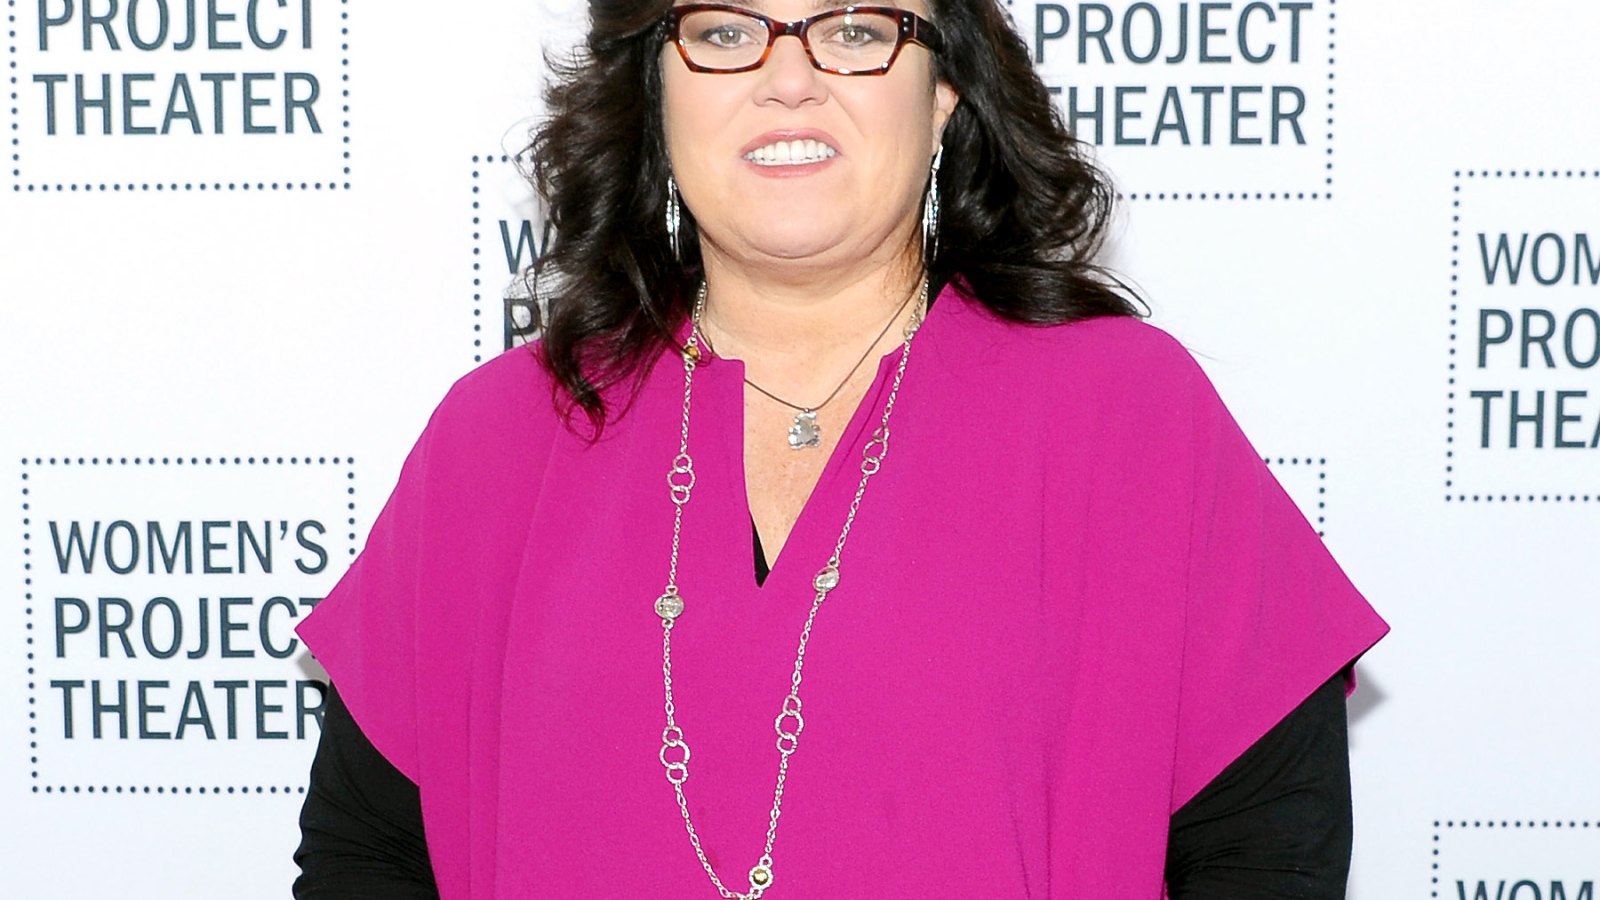 Rosie O'Donnell on May 13, 2013 in New York City.